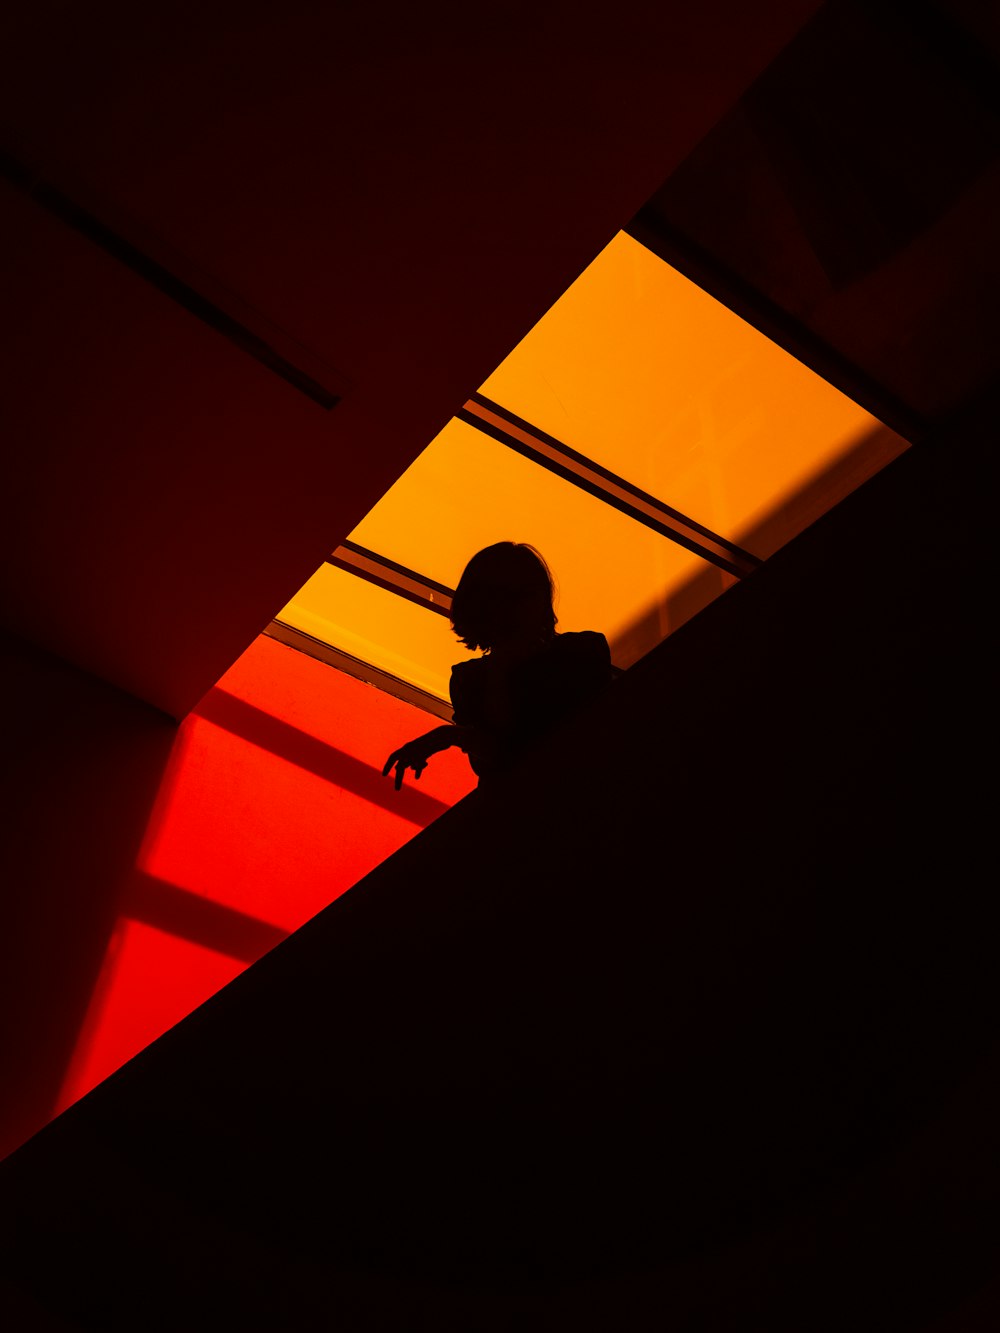 silhouette photography of woman